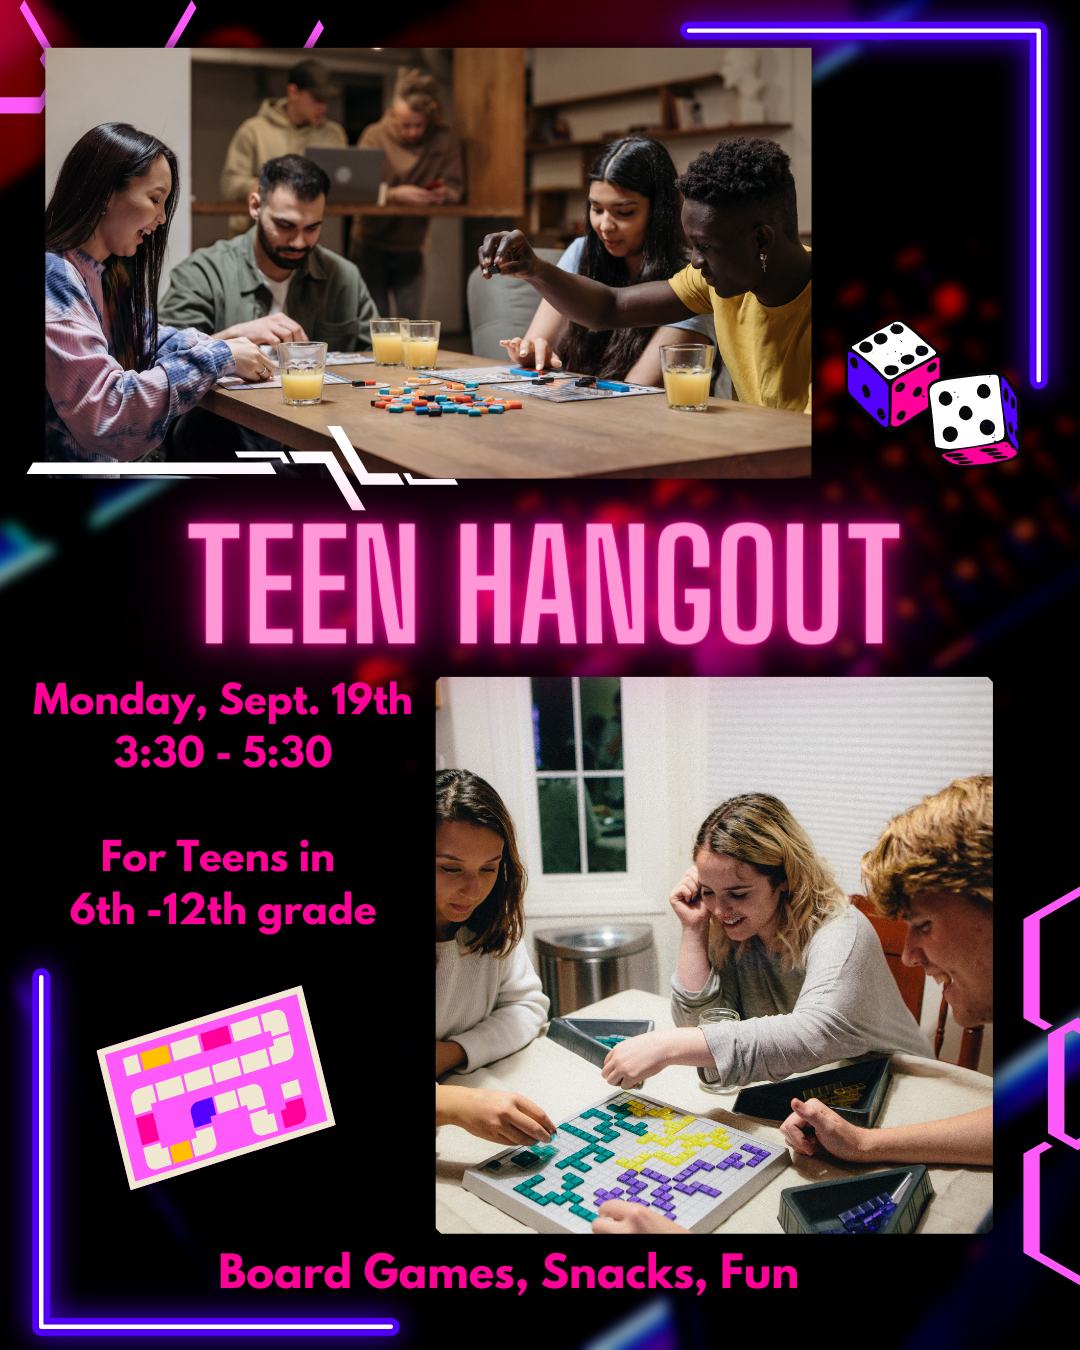 Teen Hangout. Monday September 19th, 3:30 to 5:30 pm. Board Games, Snacks, Fun